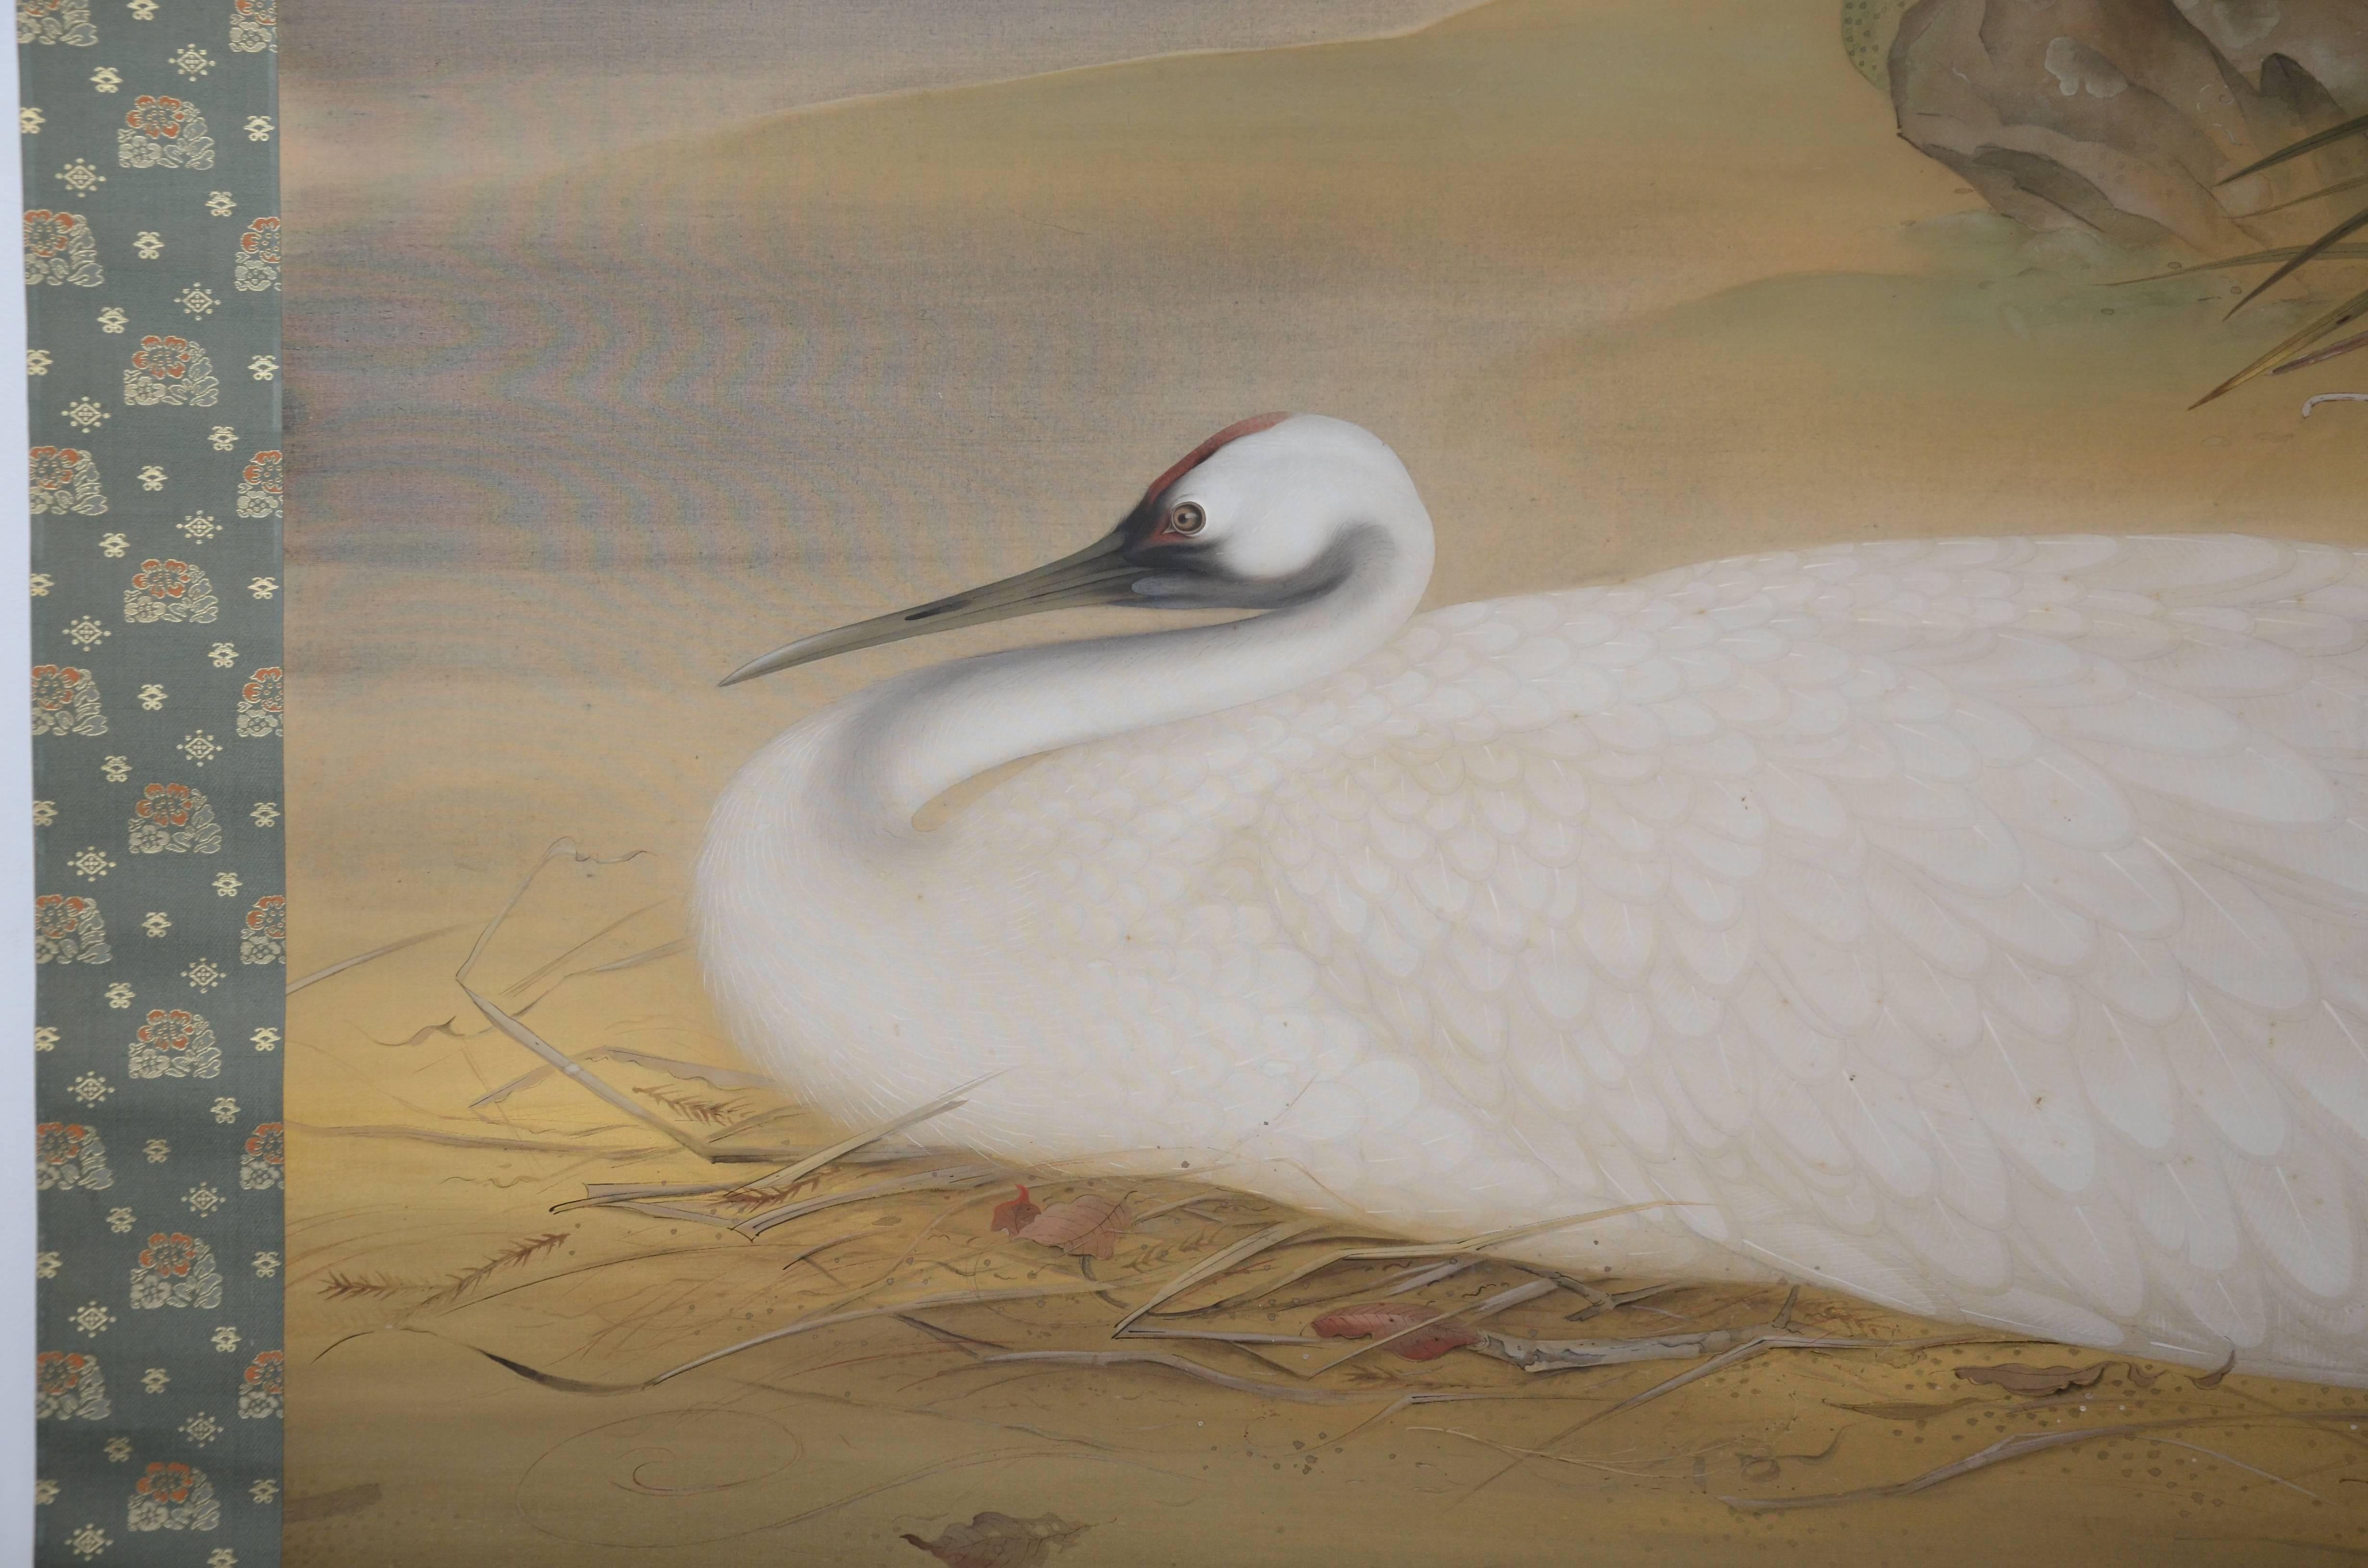 Large and exceptional Japanese hanging scroll with a realistically painted depiction of a nesting crane by Yoshifuji Yoshio, Taisho/Showa period, early 20th century.

Materials: Ink and mineral pigments on silk with brocade mounting fabrics and